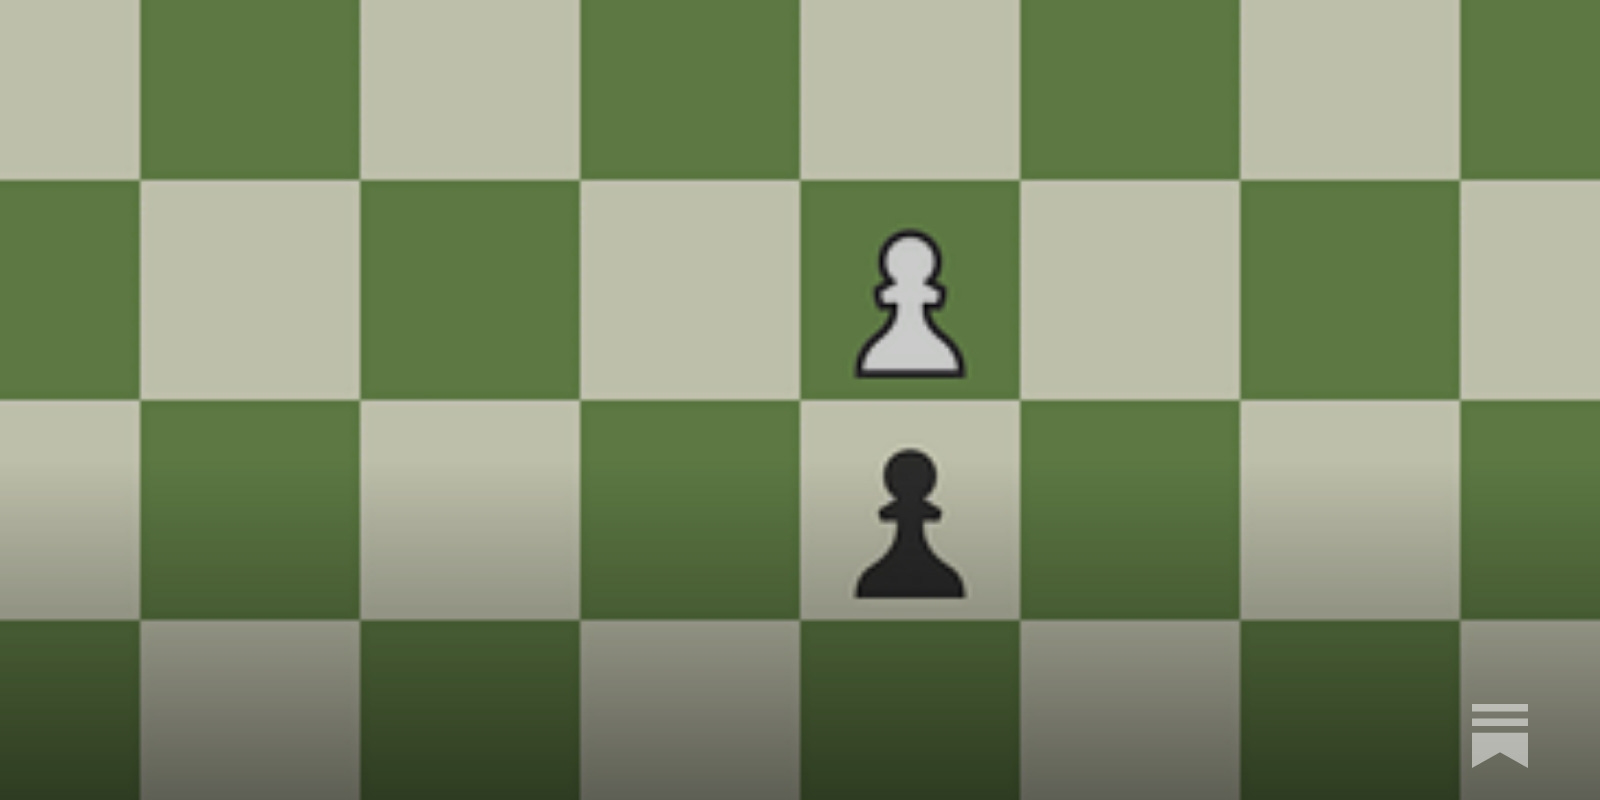 Chessable on X: Part 2 of @suryachess64's Lifetime Repertoire is out! 22  hours of high-quality video instruction will teach you how to deal with the  Catalan, QGD, and the intricacies of the